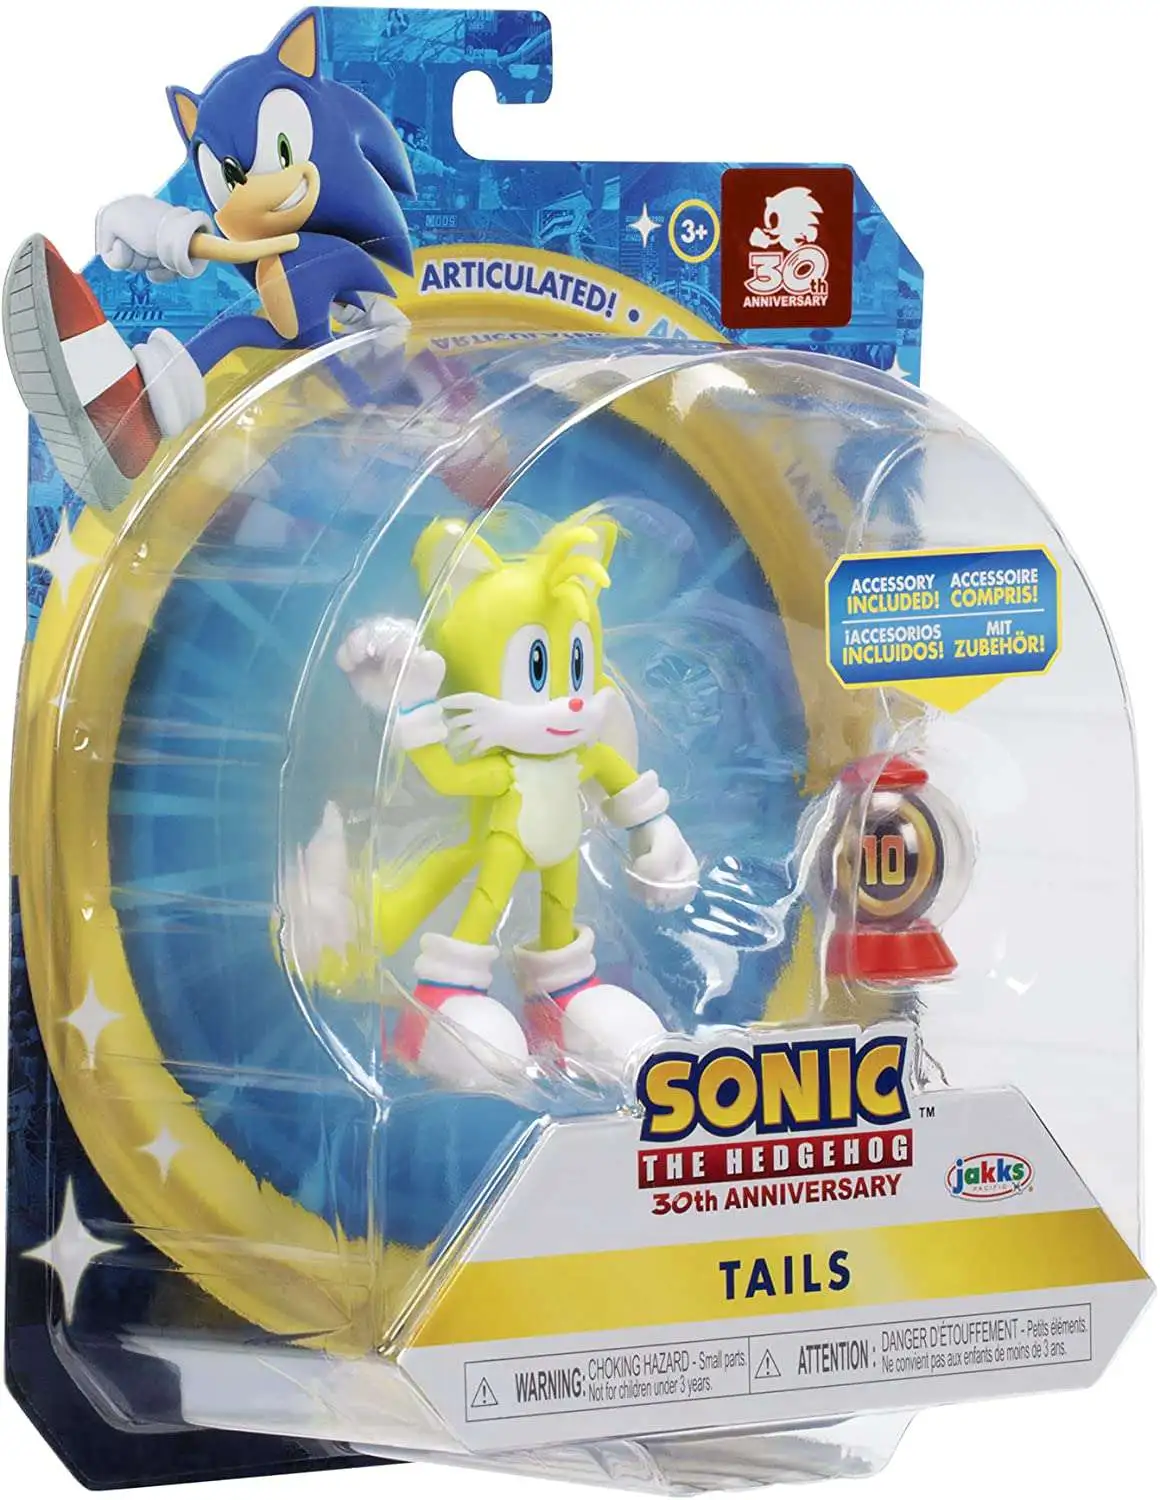 Sonic The Hedgehog Gold Ring Roleplay Toy Jazwares - ToyWiz